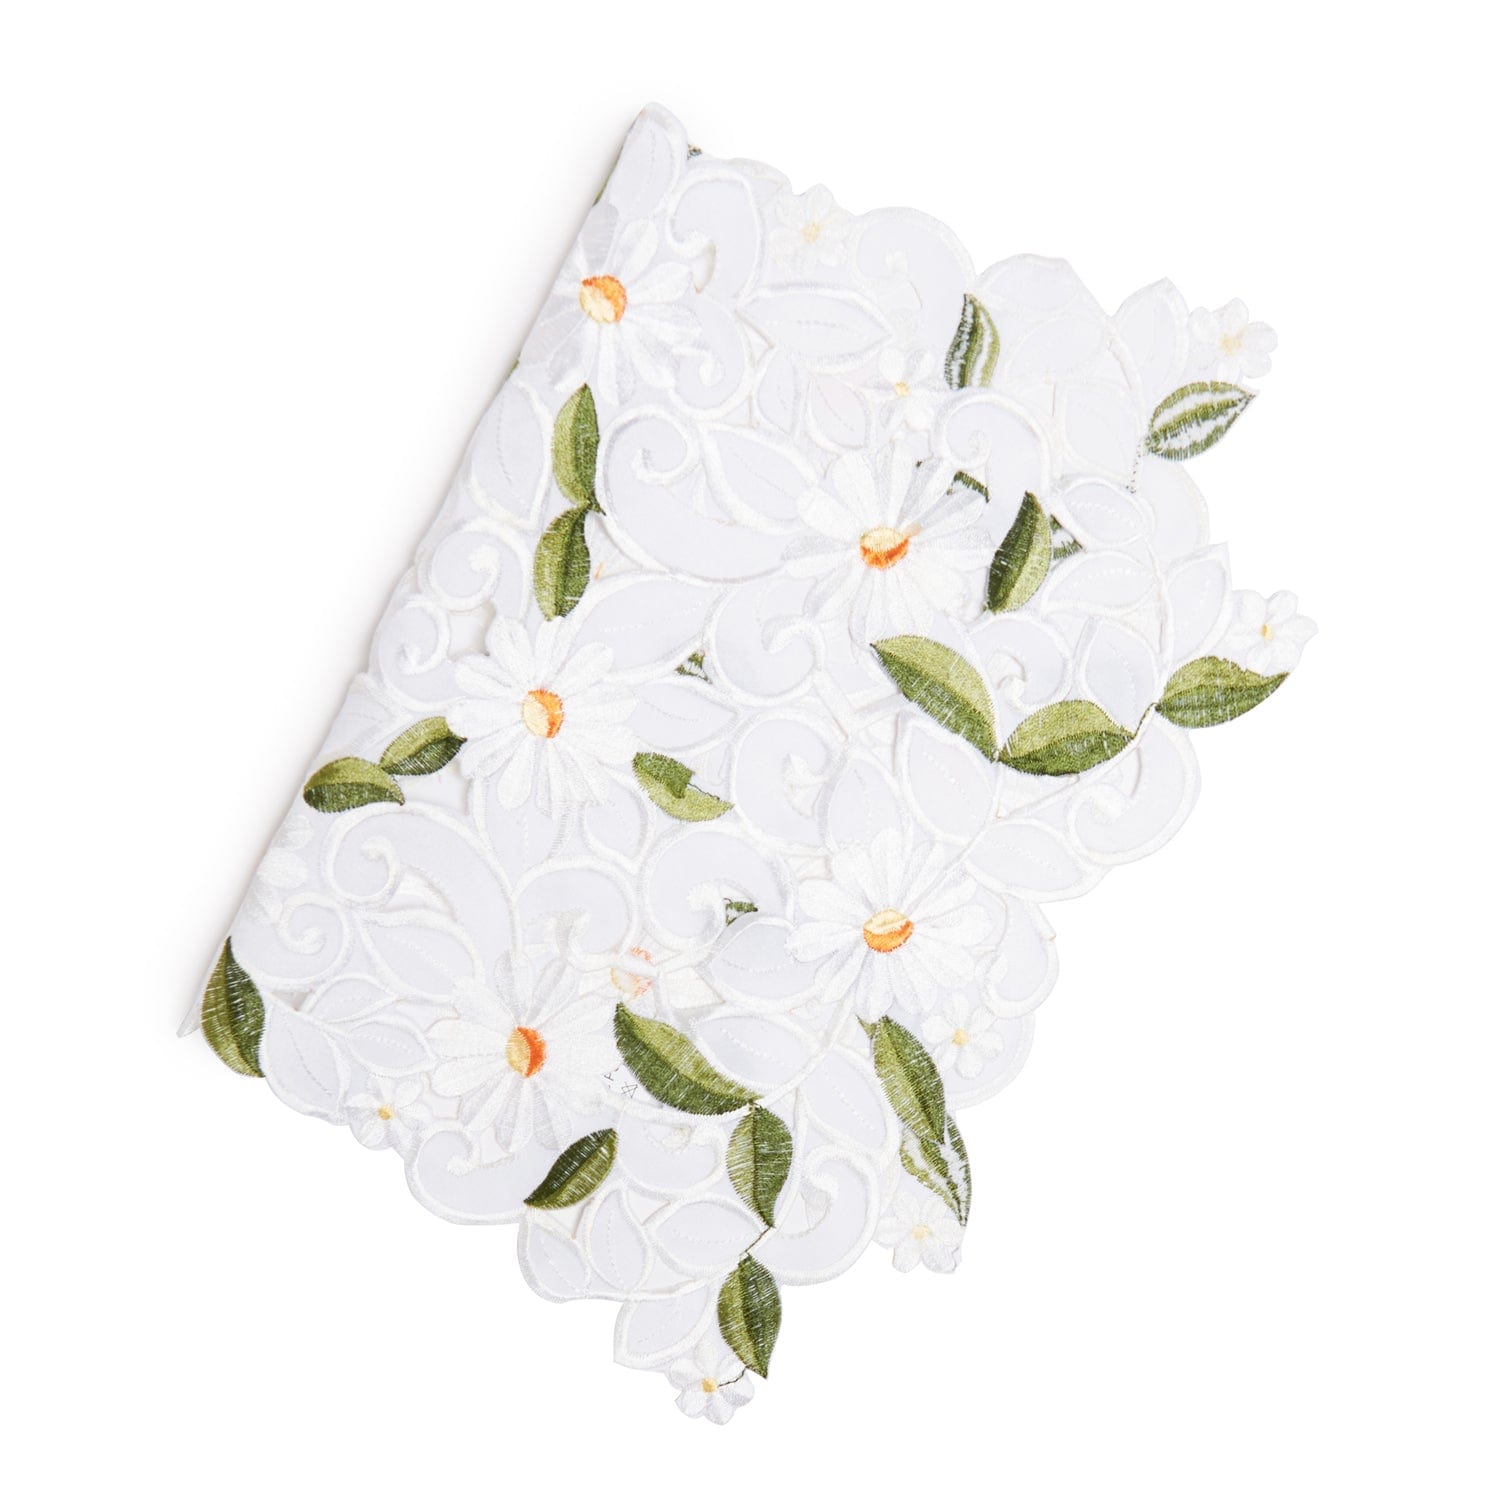 Paramount Green Poly All Over Cutwork Floral Napkin 4Pcs Set